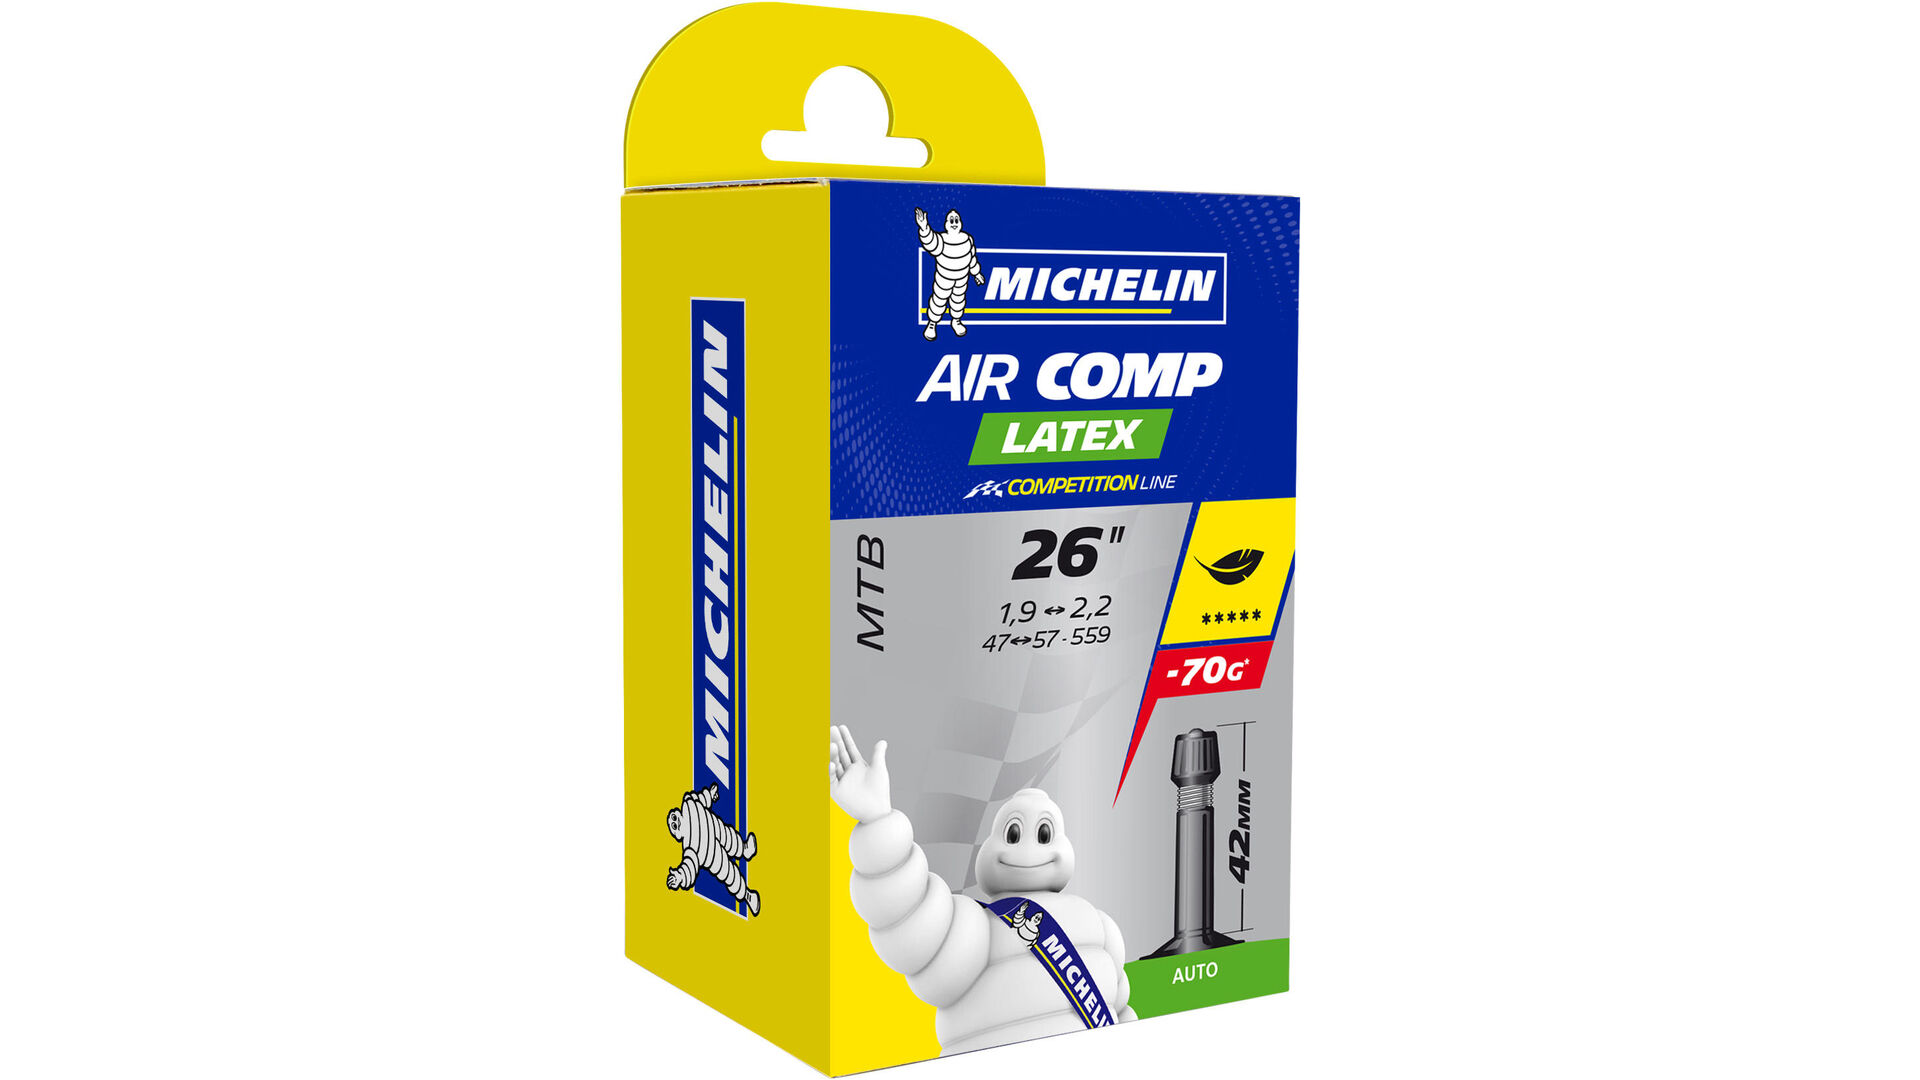 Michelin Schlauch C4 Aircomp Latex Competition Line , 26"